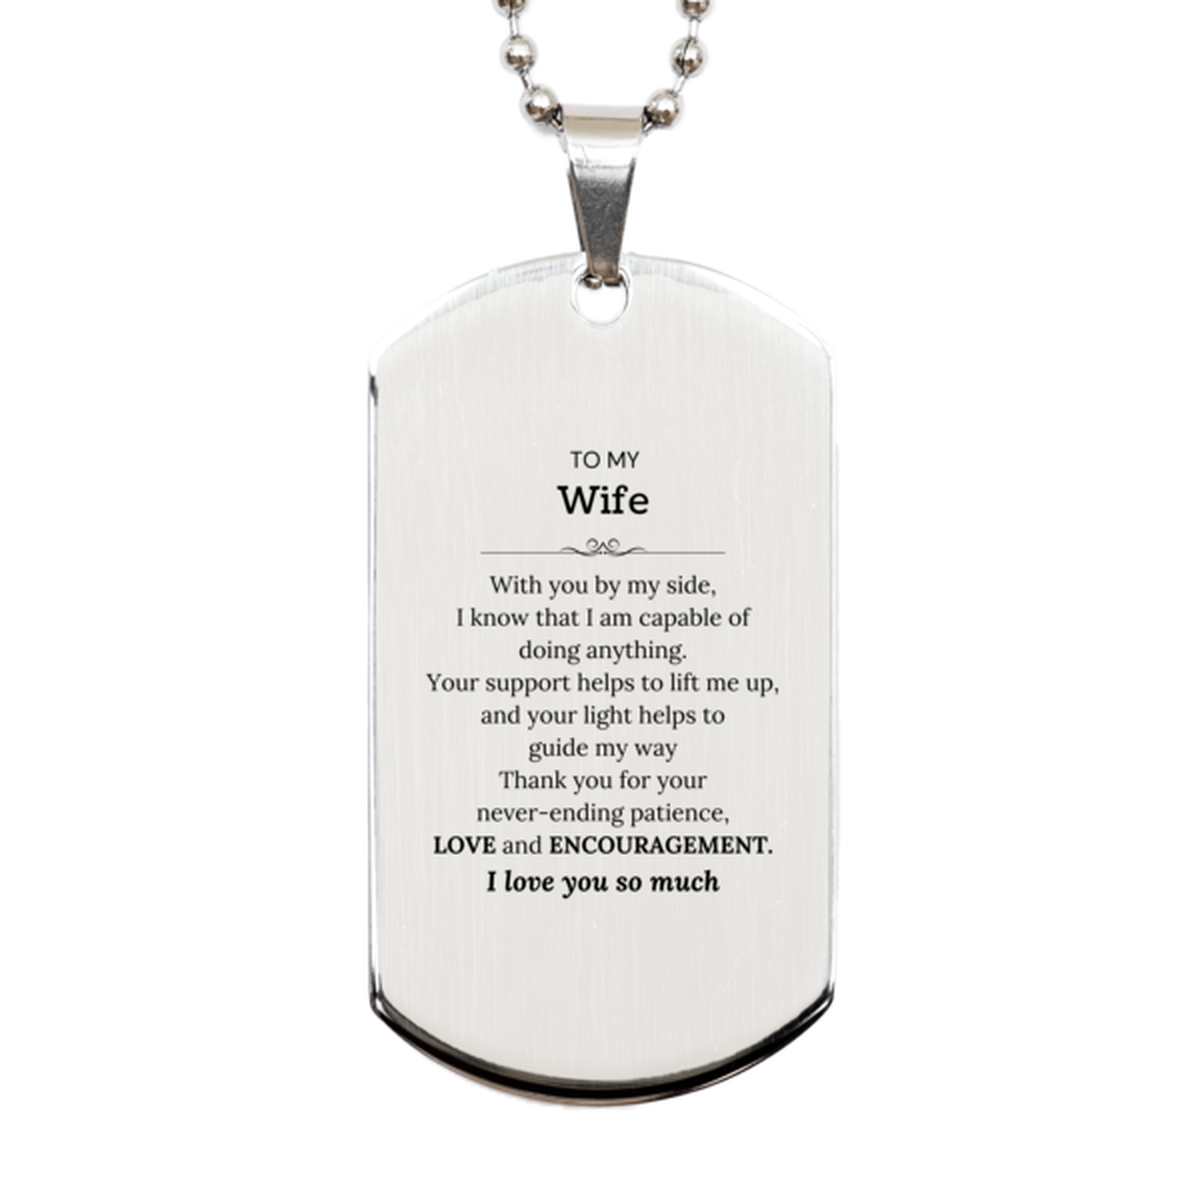 Appreciation Wife Silver Dog Tag Gifts, To My Wife Birthday Christmas Wedding Keepsake Gifts for Wife With you by my side, I know that I am capable of doing anything. I love you so much